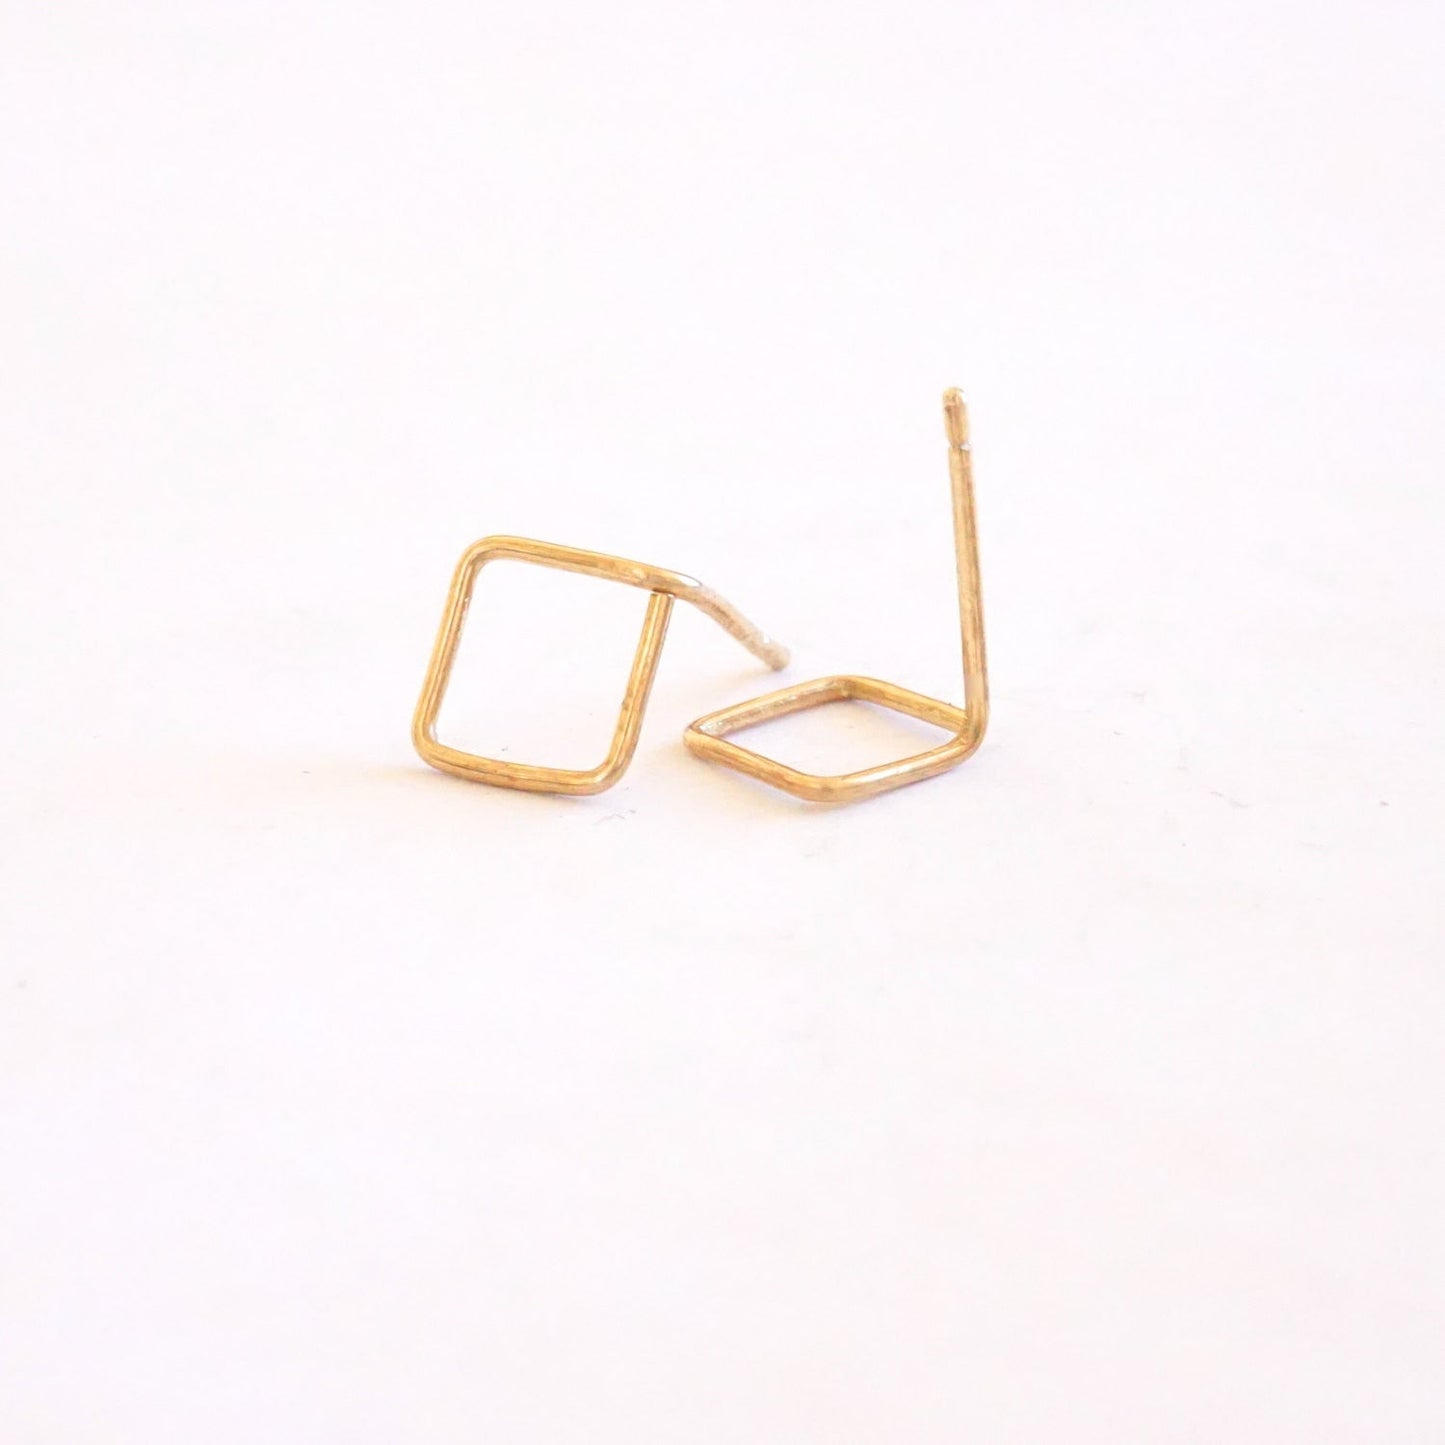 8mm Open Square Stud Earrings 013 - Patination Design